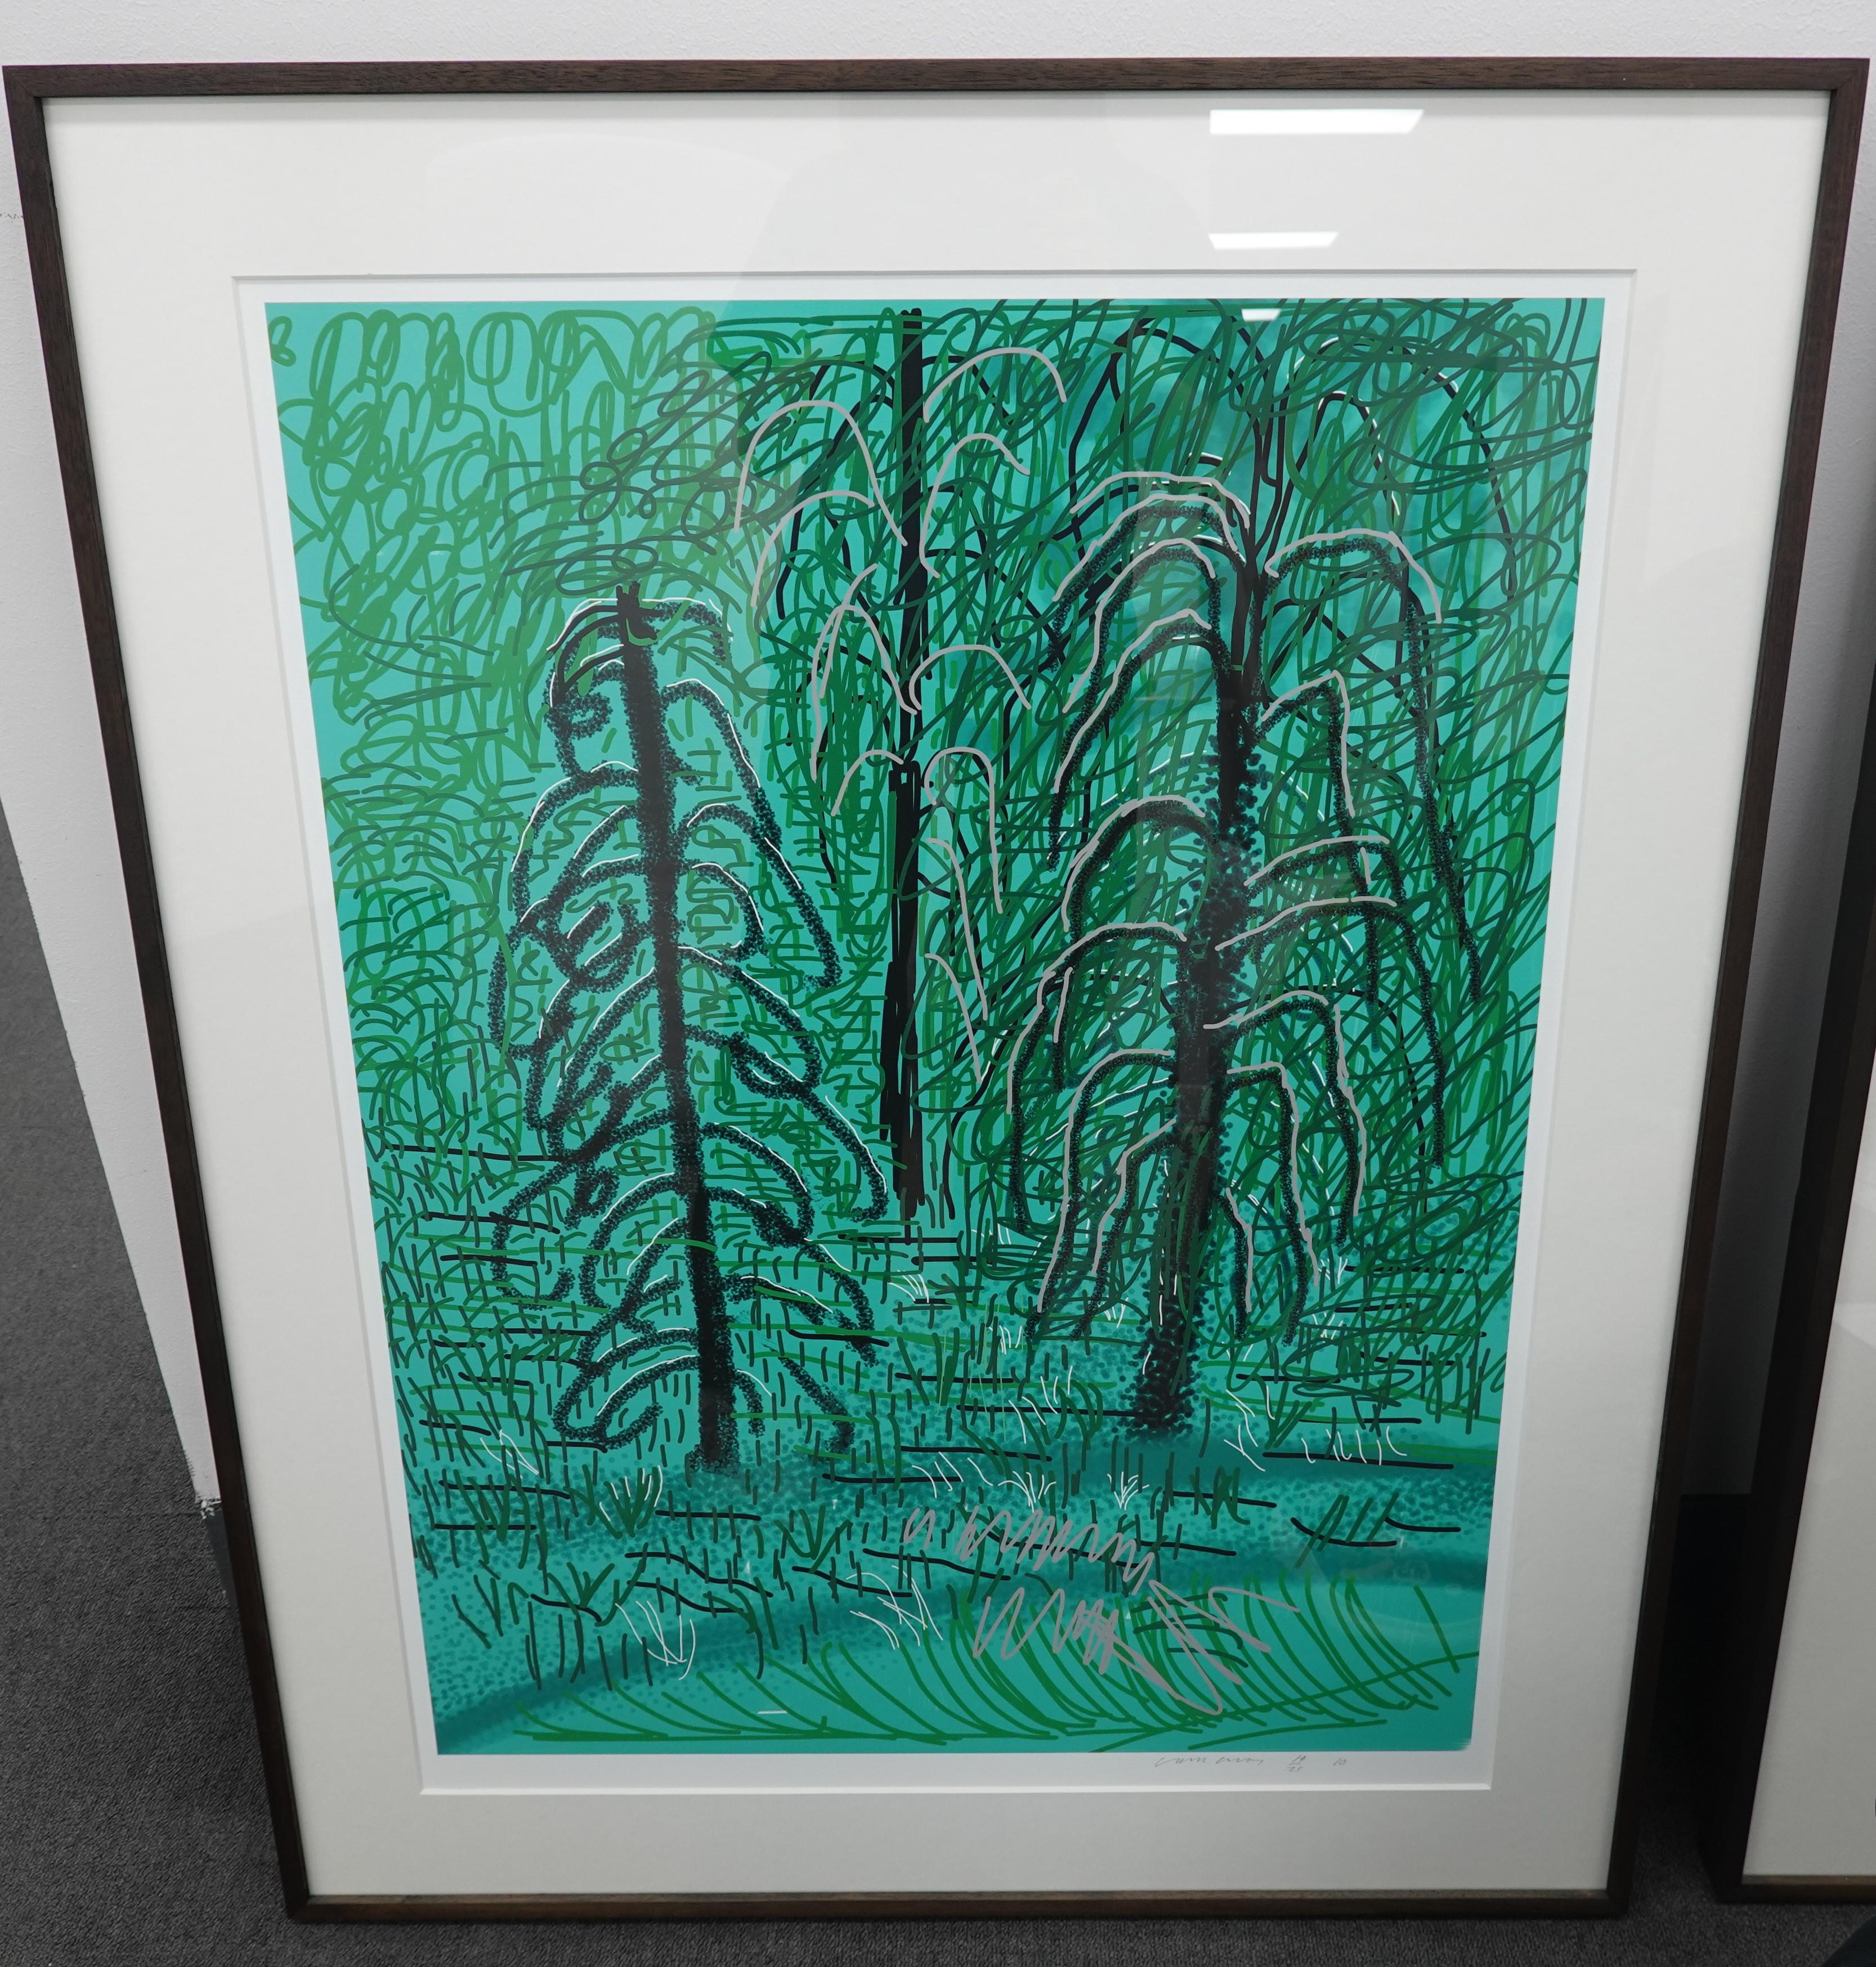 Untitled No.16 from The Yosemite Suite - Print by David Hockney